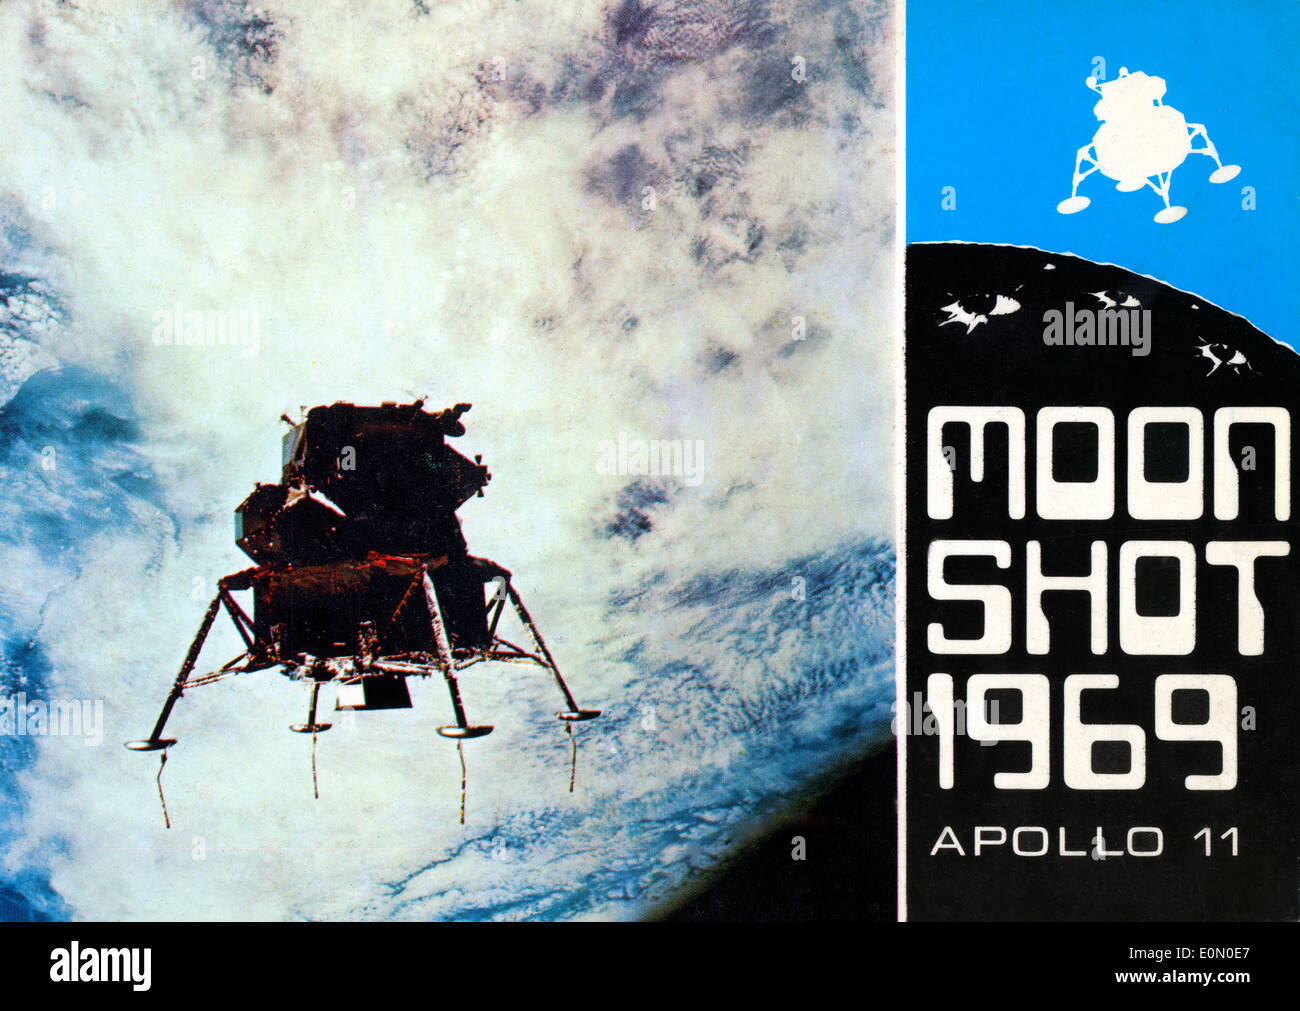 Vintage postcard of view of planet Earth and the Lunar Module Eagle Apollo 11 with text Moon Shot 1969   KATHY DEWITT Stock Photo